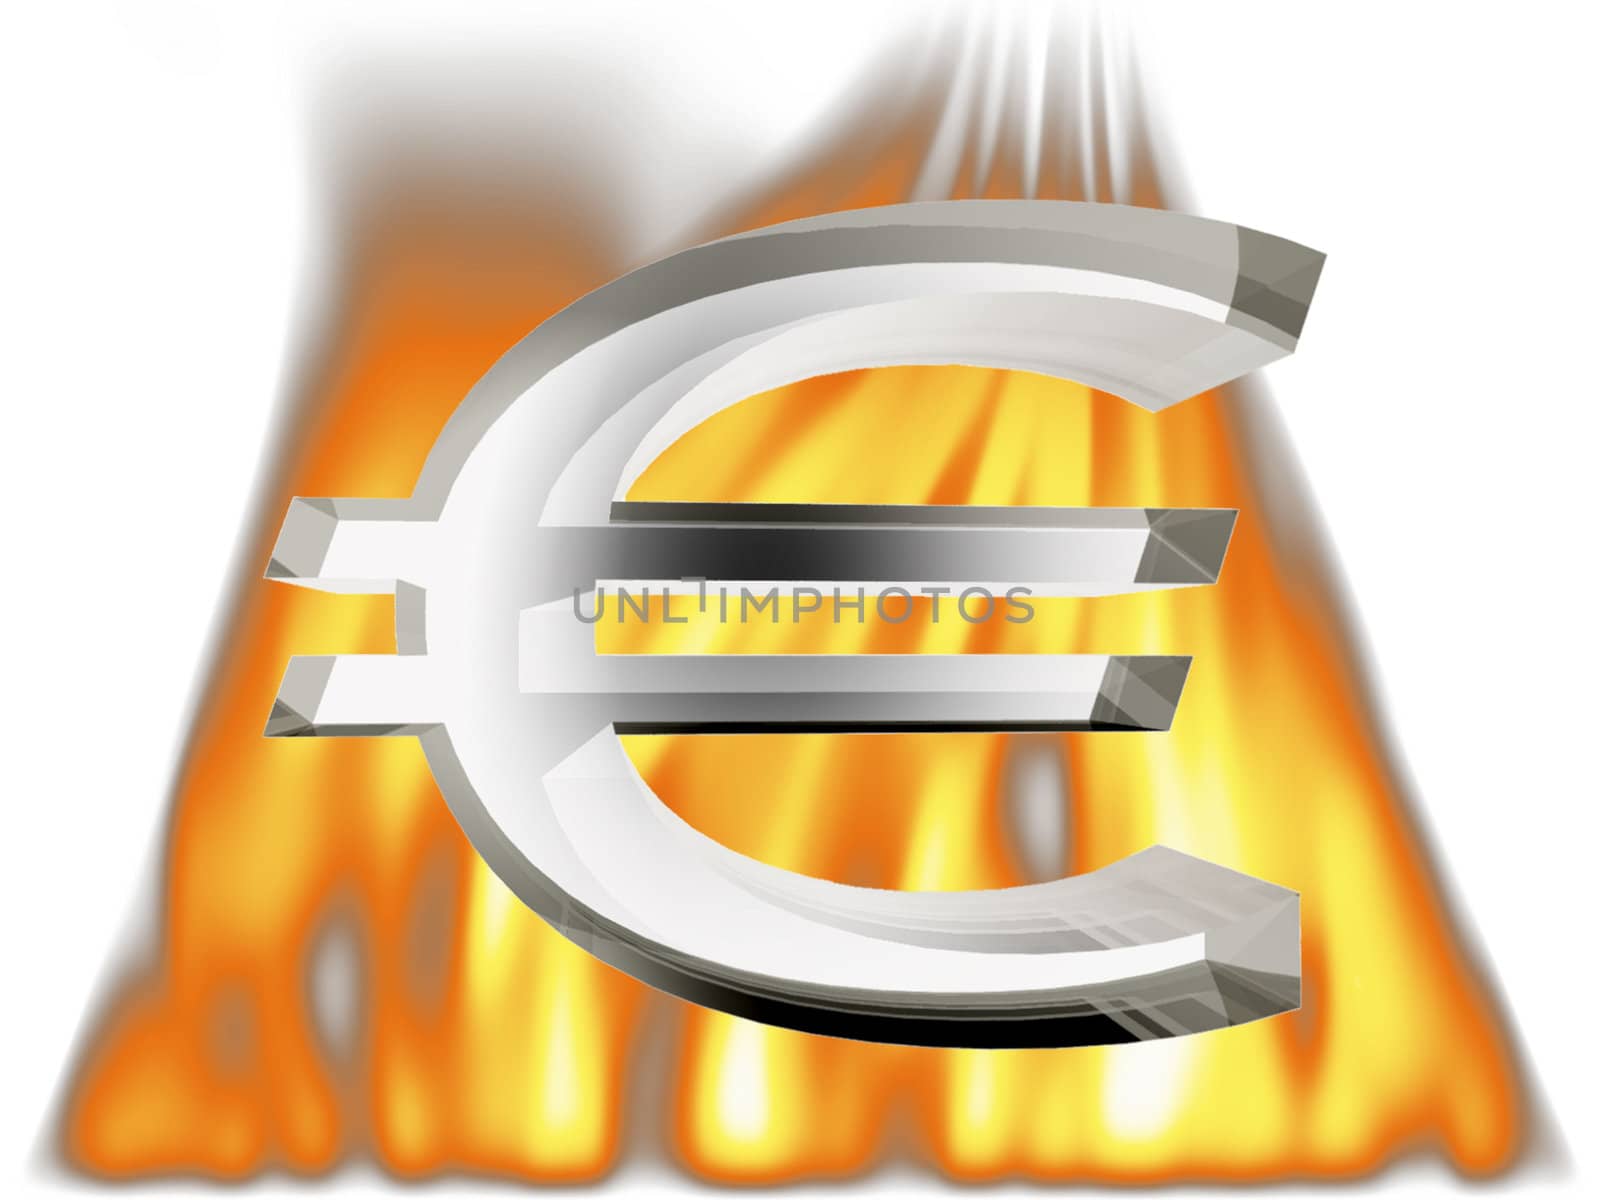 the euro symbol on fire